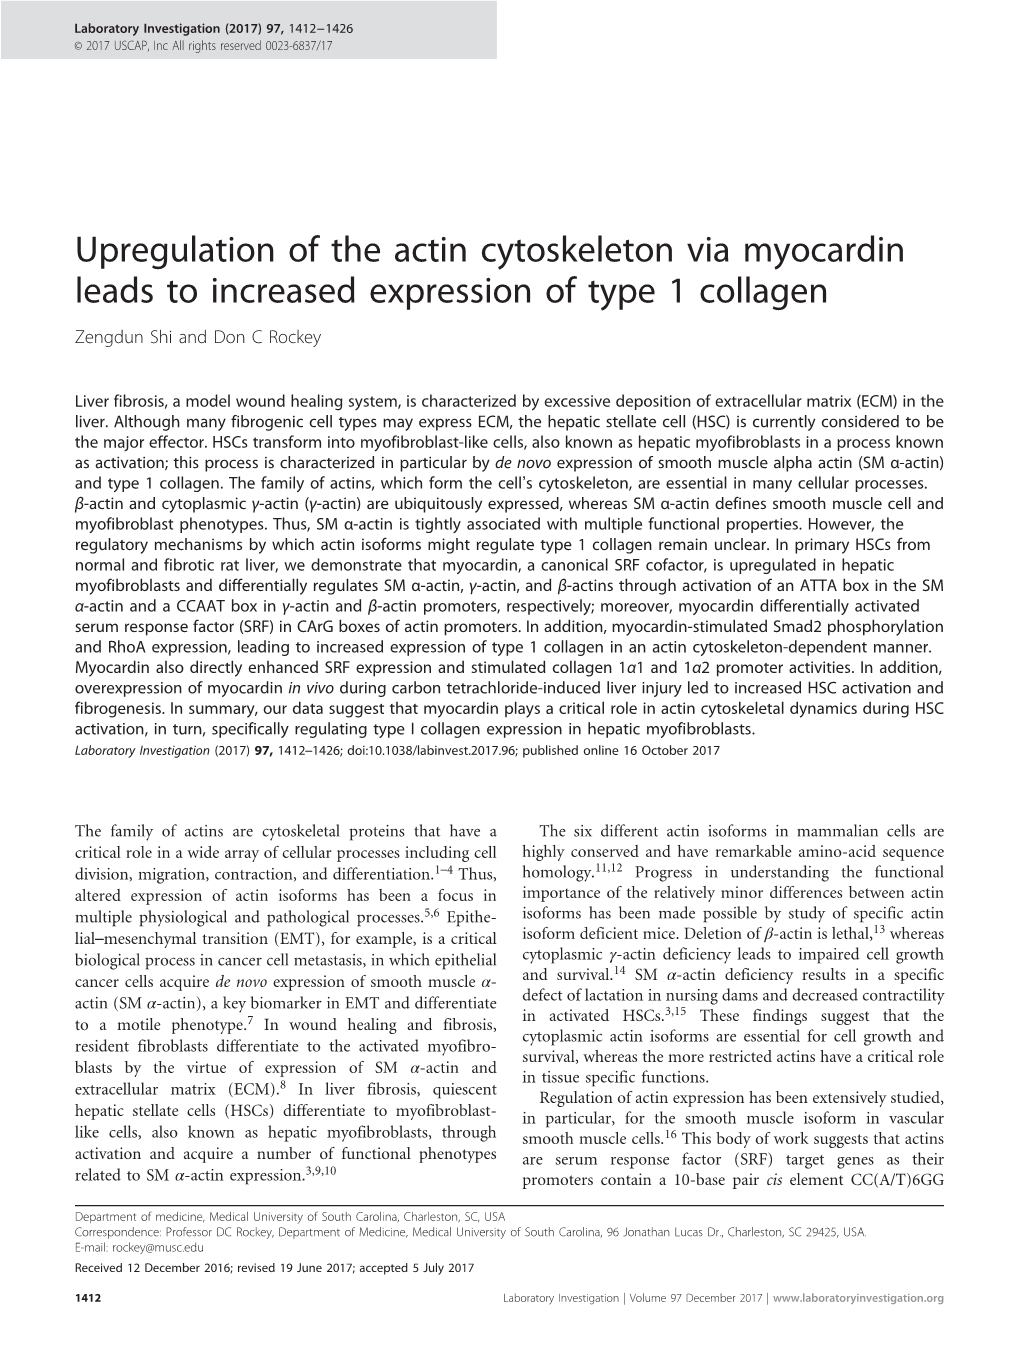 Upregulation of the Actin Cytoskeleton Via Myocardin Leads to Increased Expression of Type 1 Collagen Zengdun Shi and Don C Rockey